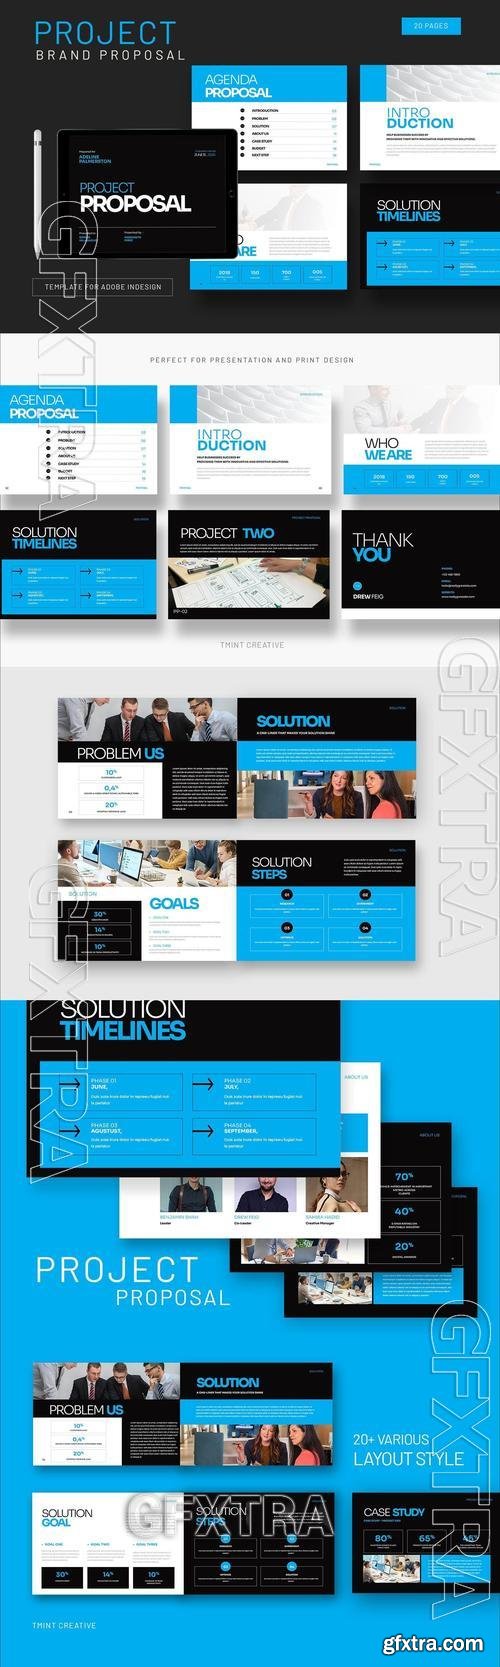 Project Proposal Guideline Creative Template 9F2RQWB